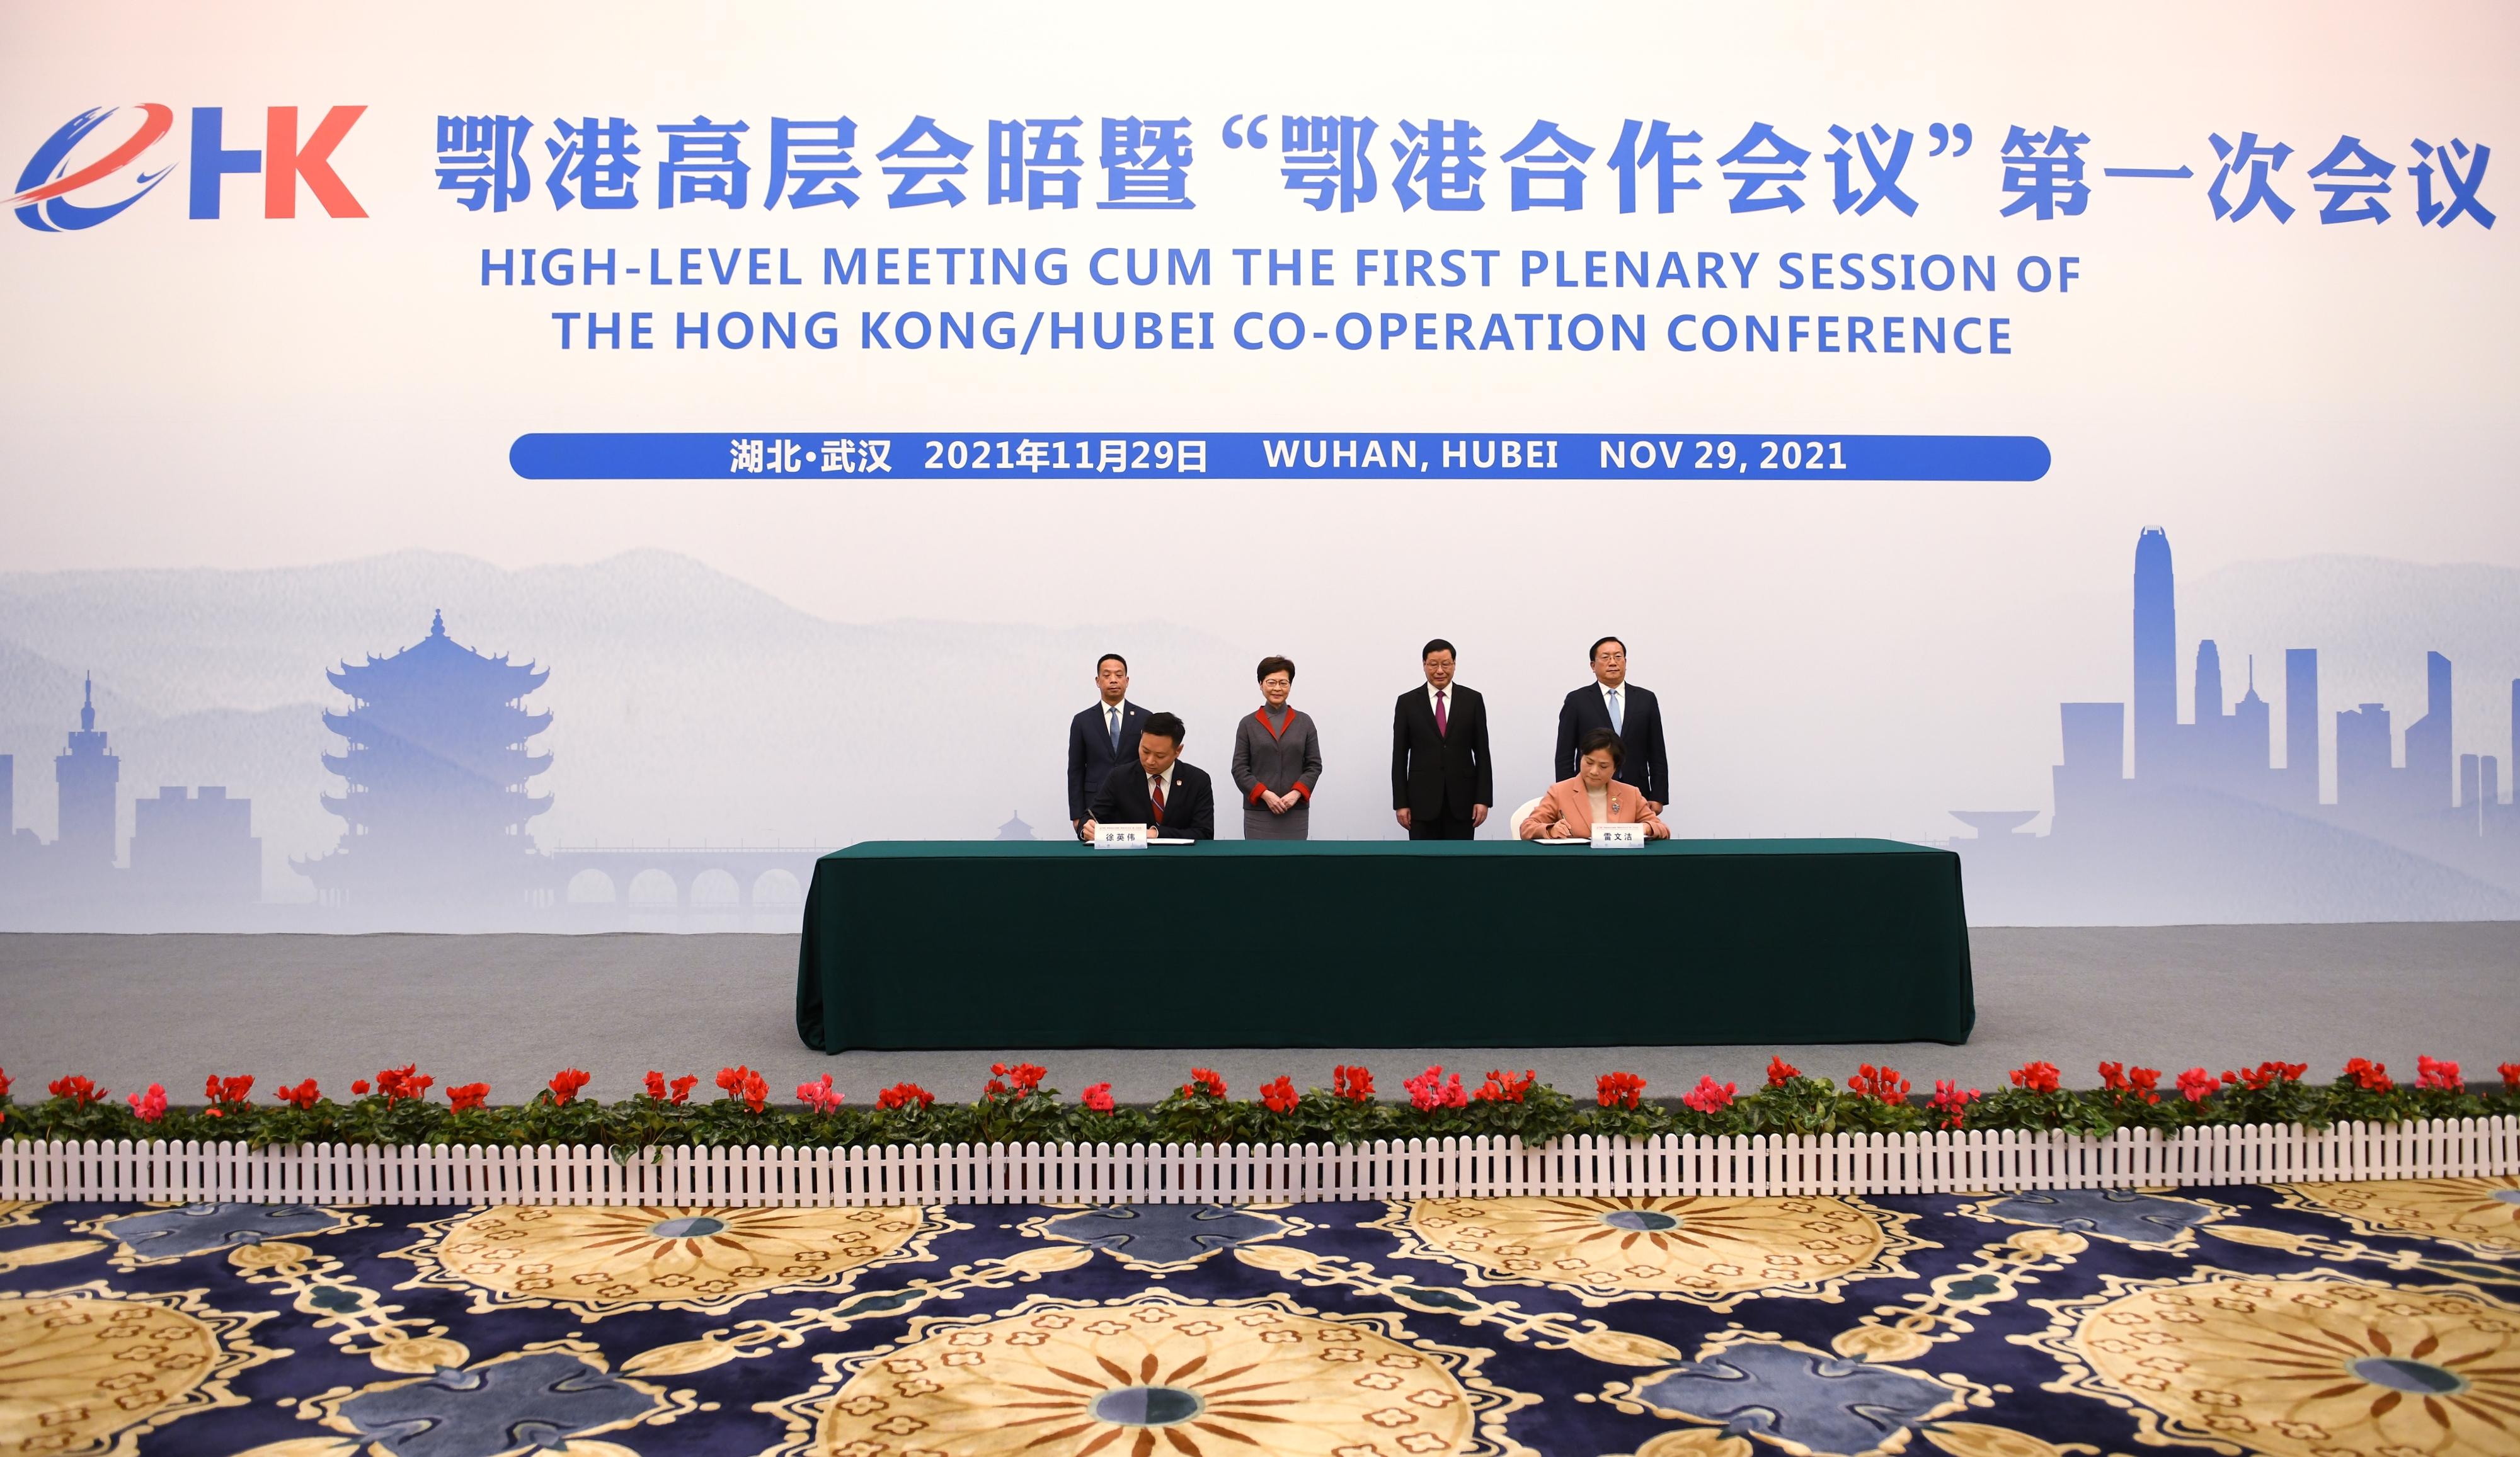 The Chief Executive, Mrs Carrie Lam, today (November 29) led a delegation of the Hong Kong Special Administrative Region Government to attend the High-Level Meeting cum First Plenary Session of the Hong Kong/Hubei Co-operation Conference. Photo shows (back row, from left) Deputy Director of the Hong Kong and Macao Affairs Office of the State Council Mr Huang Liuquan; Mrs Lam; the Secretary of the CPC Hubei Provincial Committee, Mr Ying Yong; and the Governor of Hubei Province, Mr Wang Zhonglin, witnessing the signing of the Agreement on Cultural Exchange and Co-operation between Hubei Province and the Hong Kong Special Administrative Region by the Secretary for Home Affairs, Mr Caspar Tsui (front row, left) and the  Director General of the Department of Culture and Tourism of Hubei Province, Ms Lei Wenjie (front row, right).